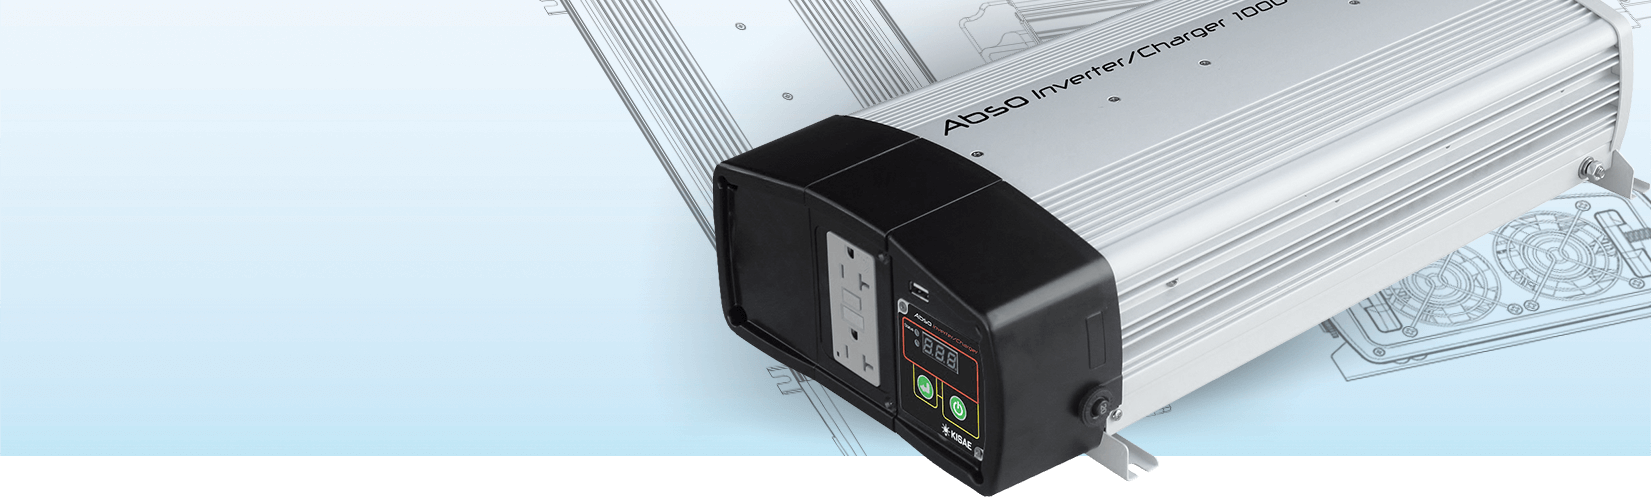 Kisae Abso IC121040i - Combiné Chargeur convertisseur - Pur Sinus